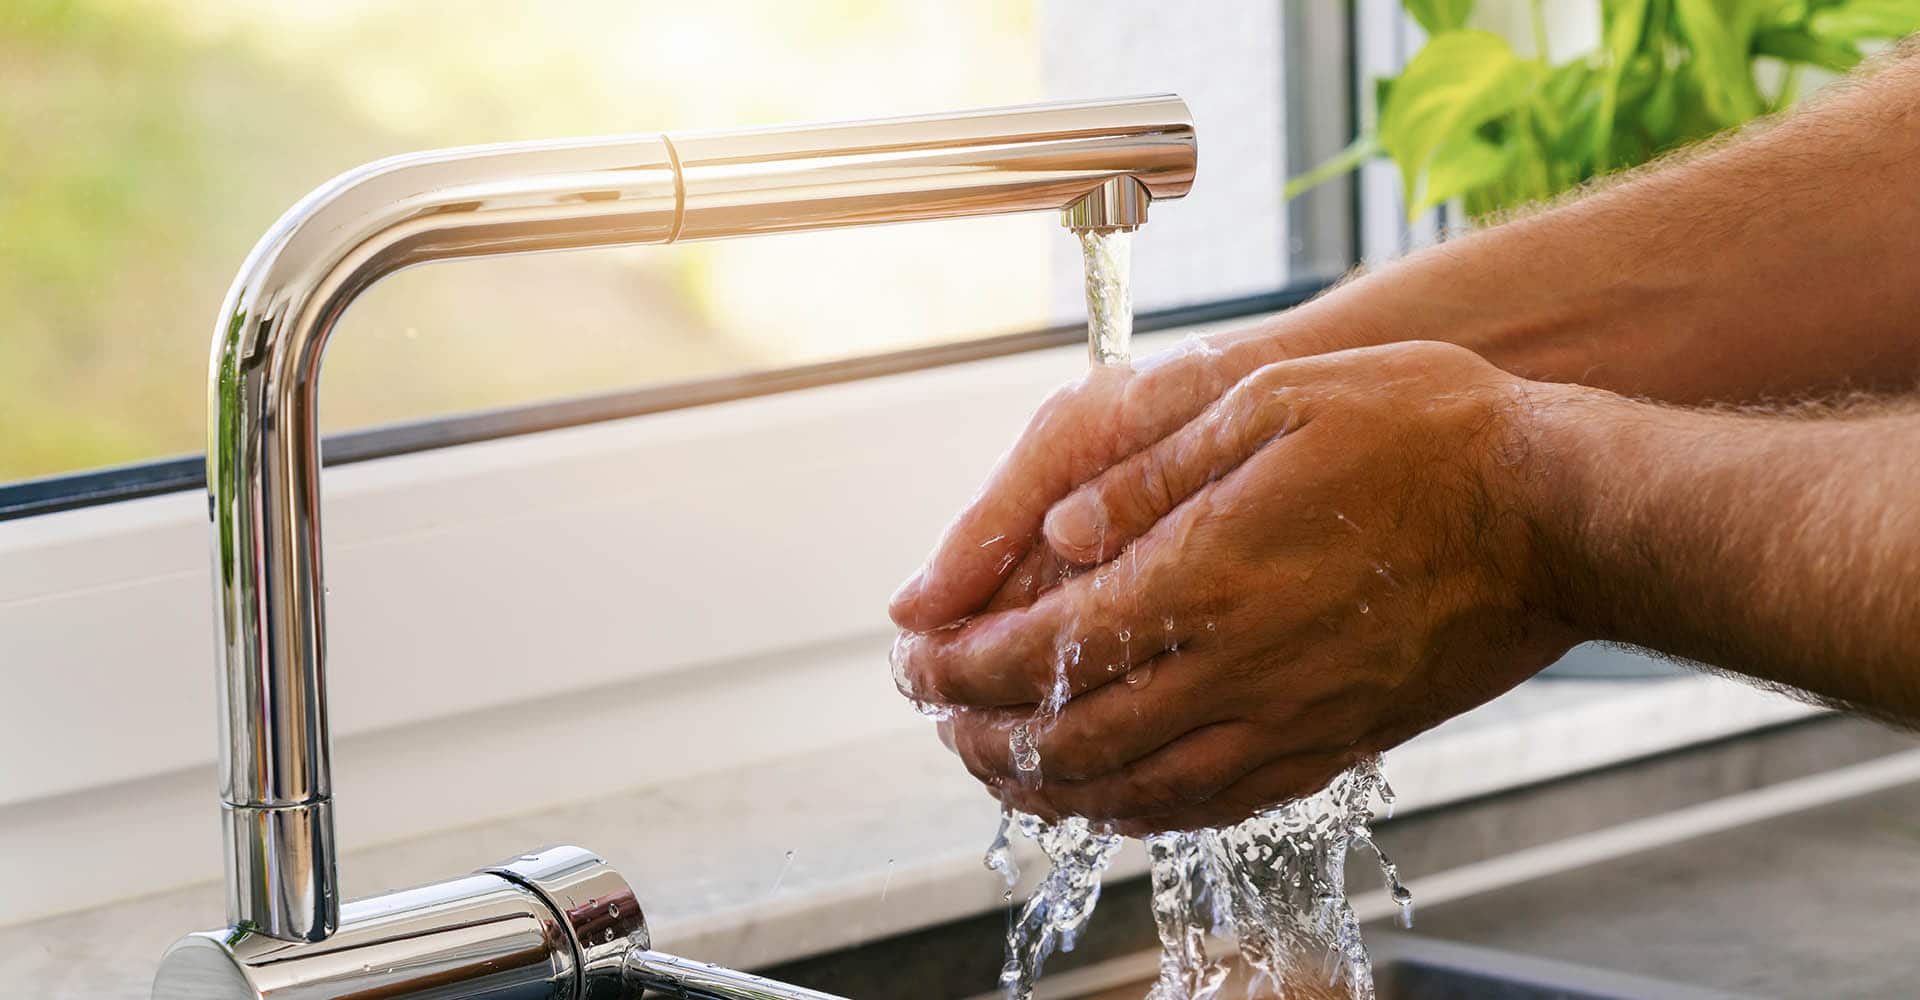 Man washes hands for hygiene over sink